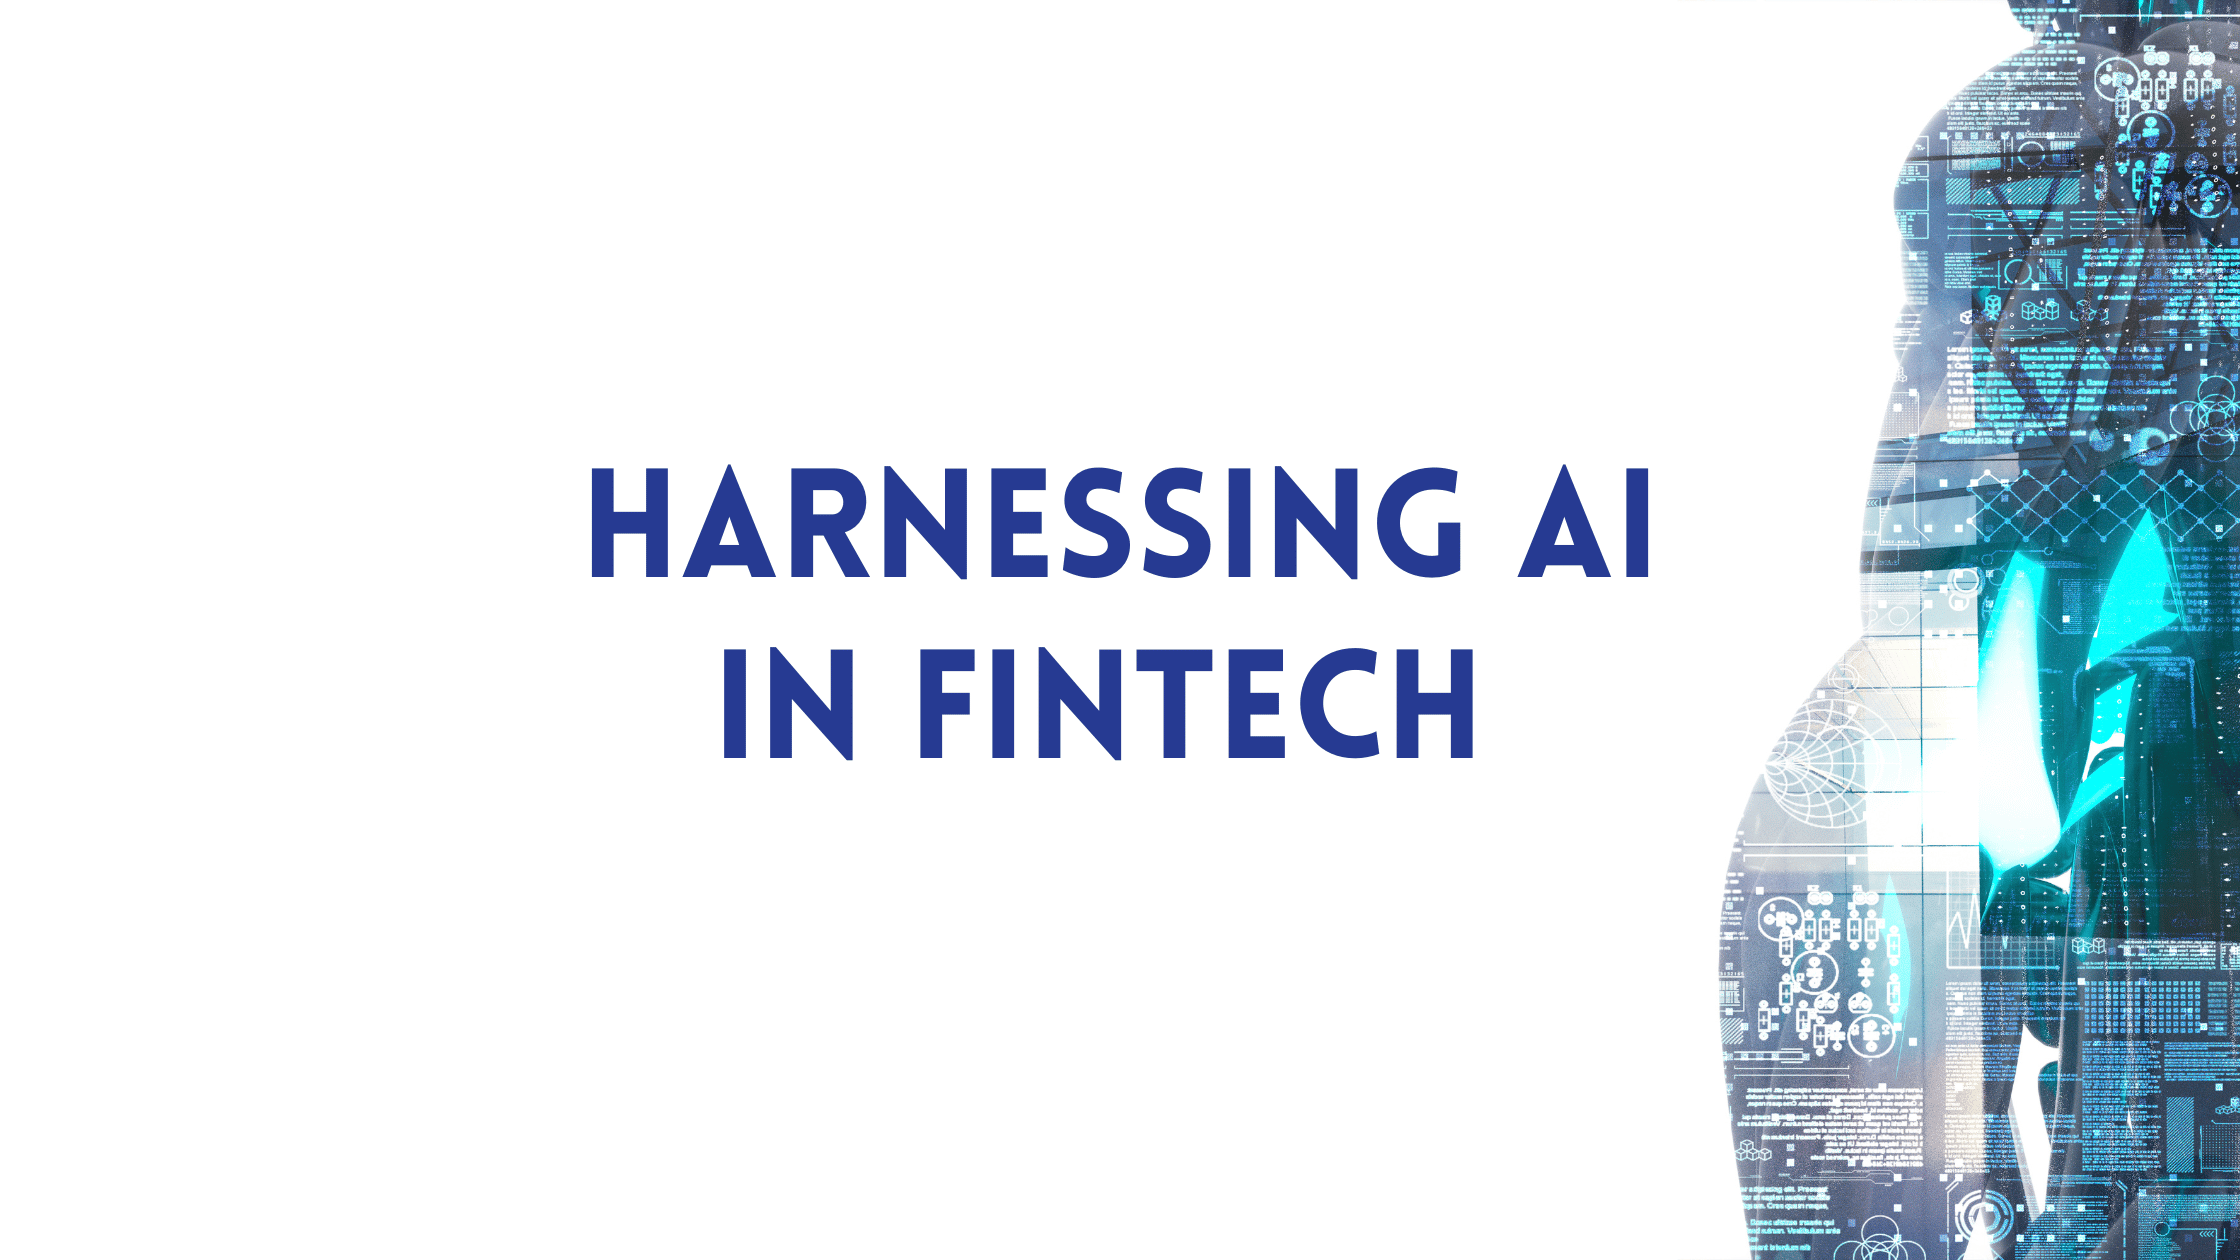 "Harnessing Artificial Intelligence in fintech" with a blue silhouette of an AI humanoid model on the side